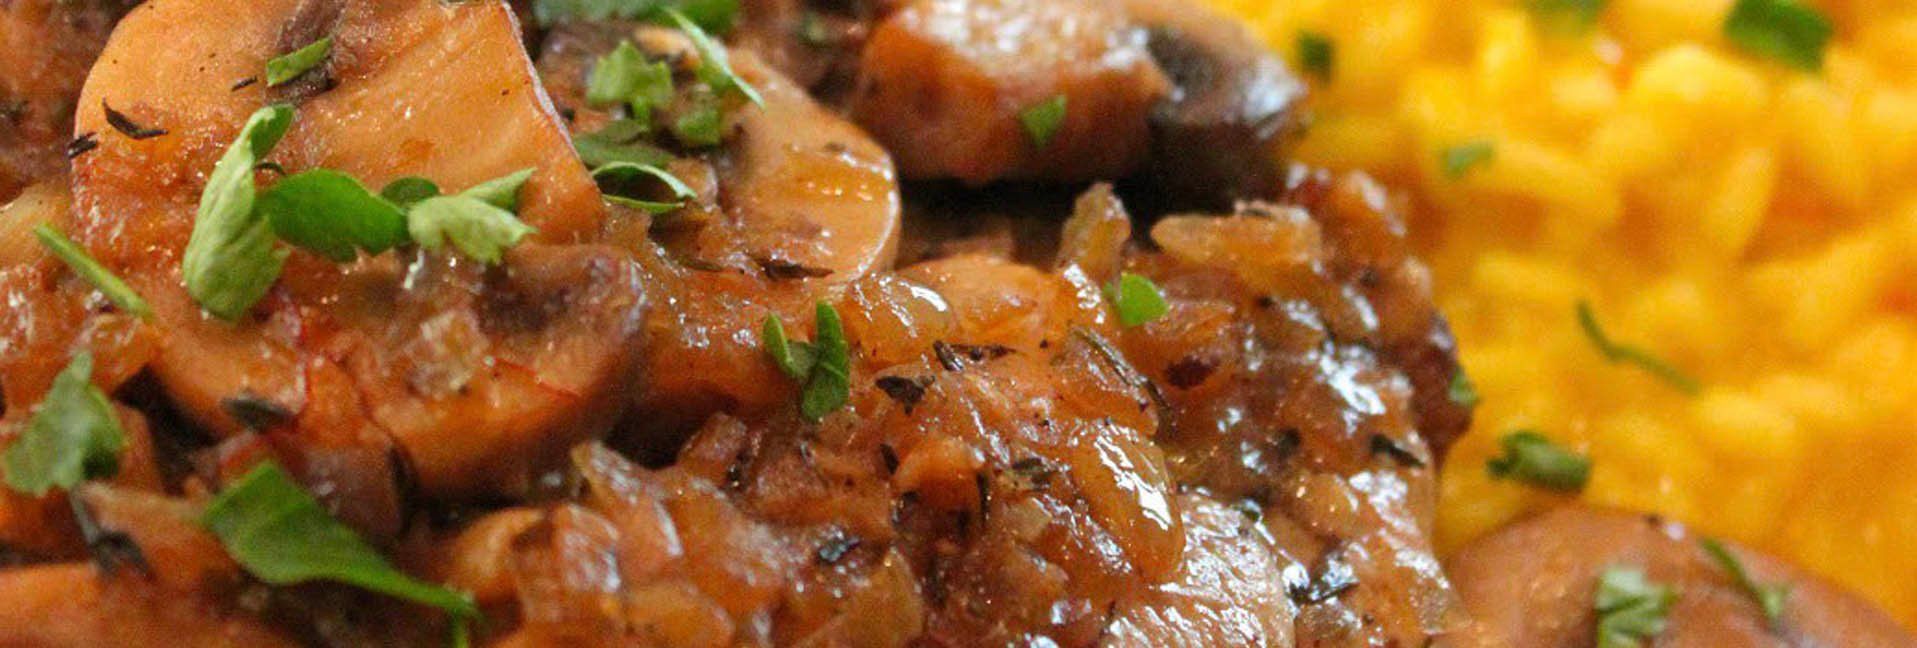 Pork Chops Marsala - Rich and flavorful comfort food